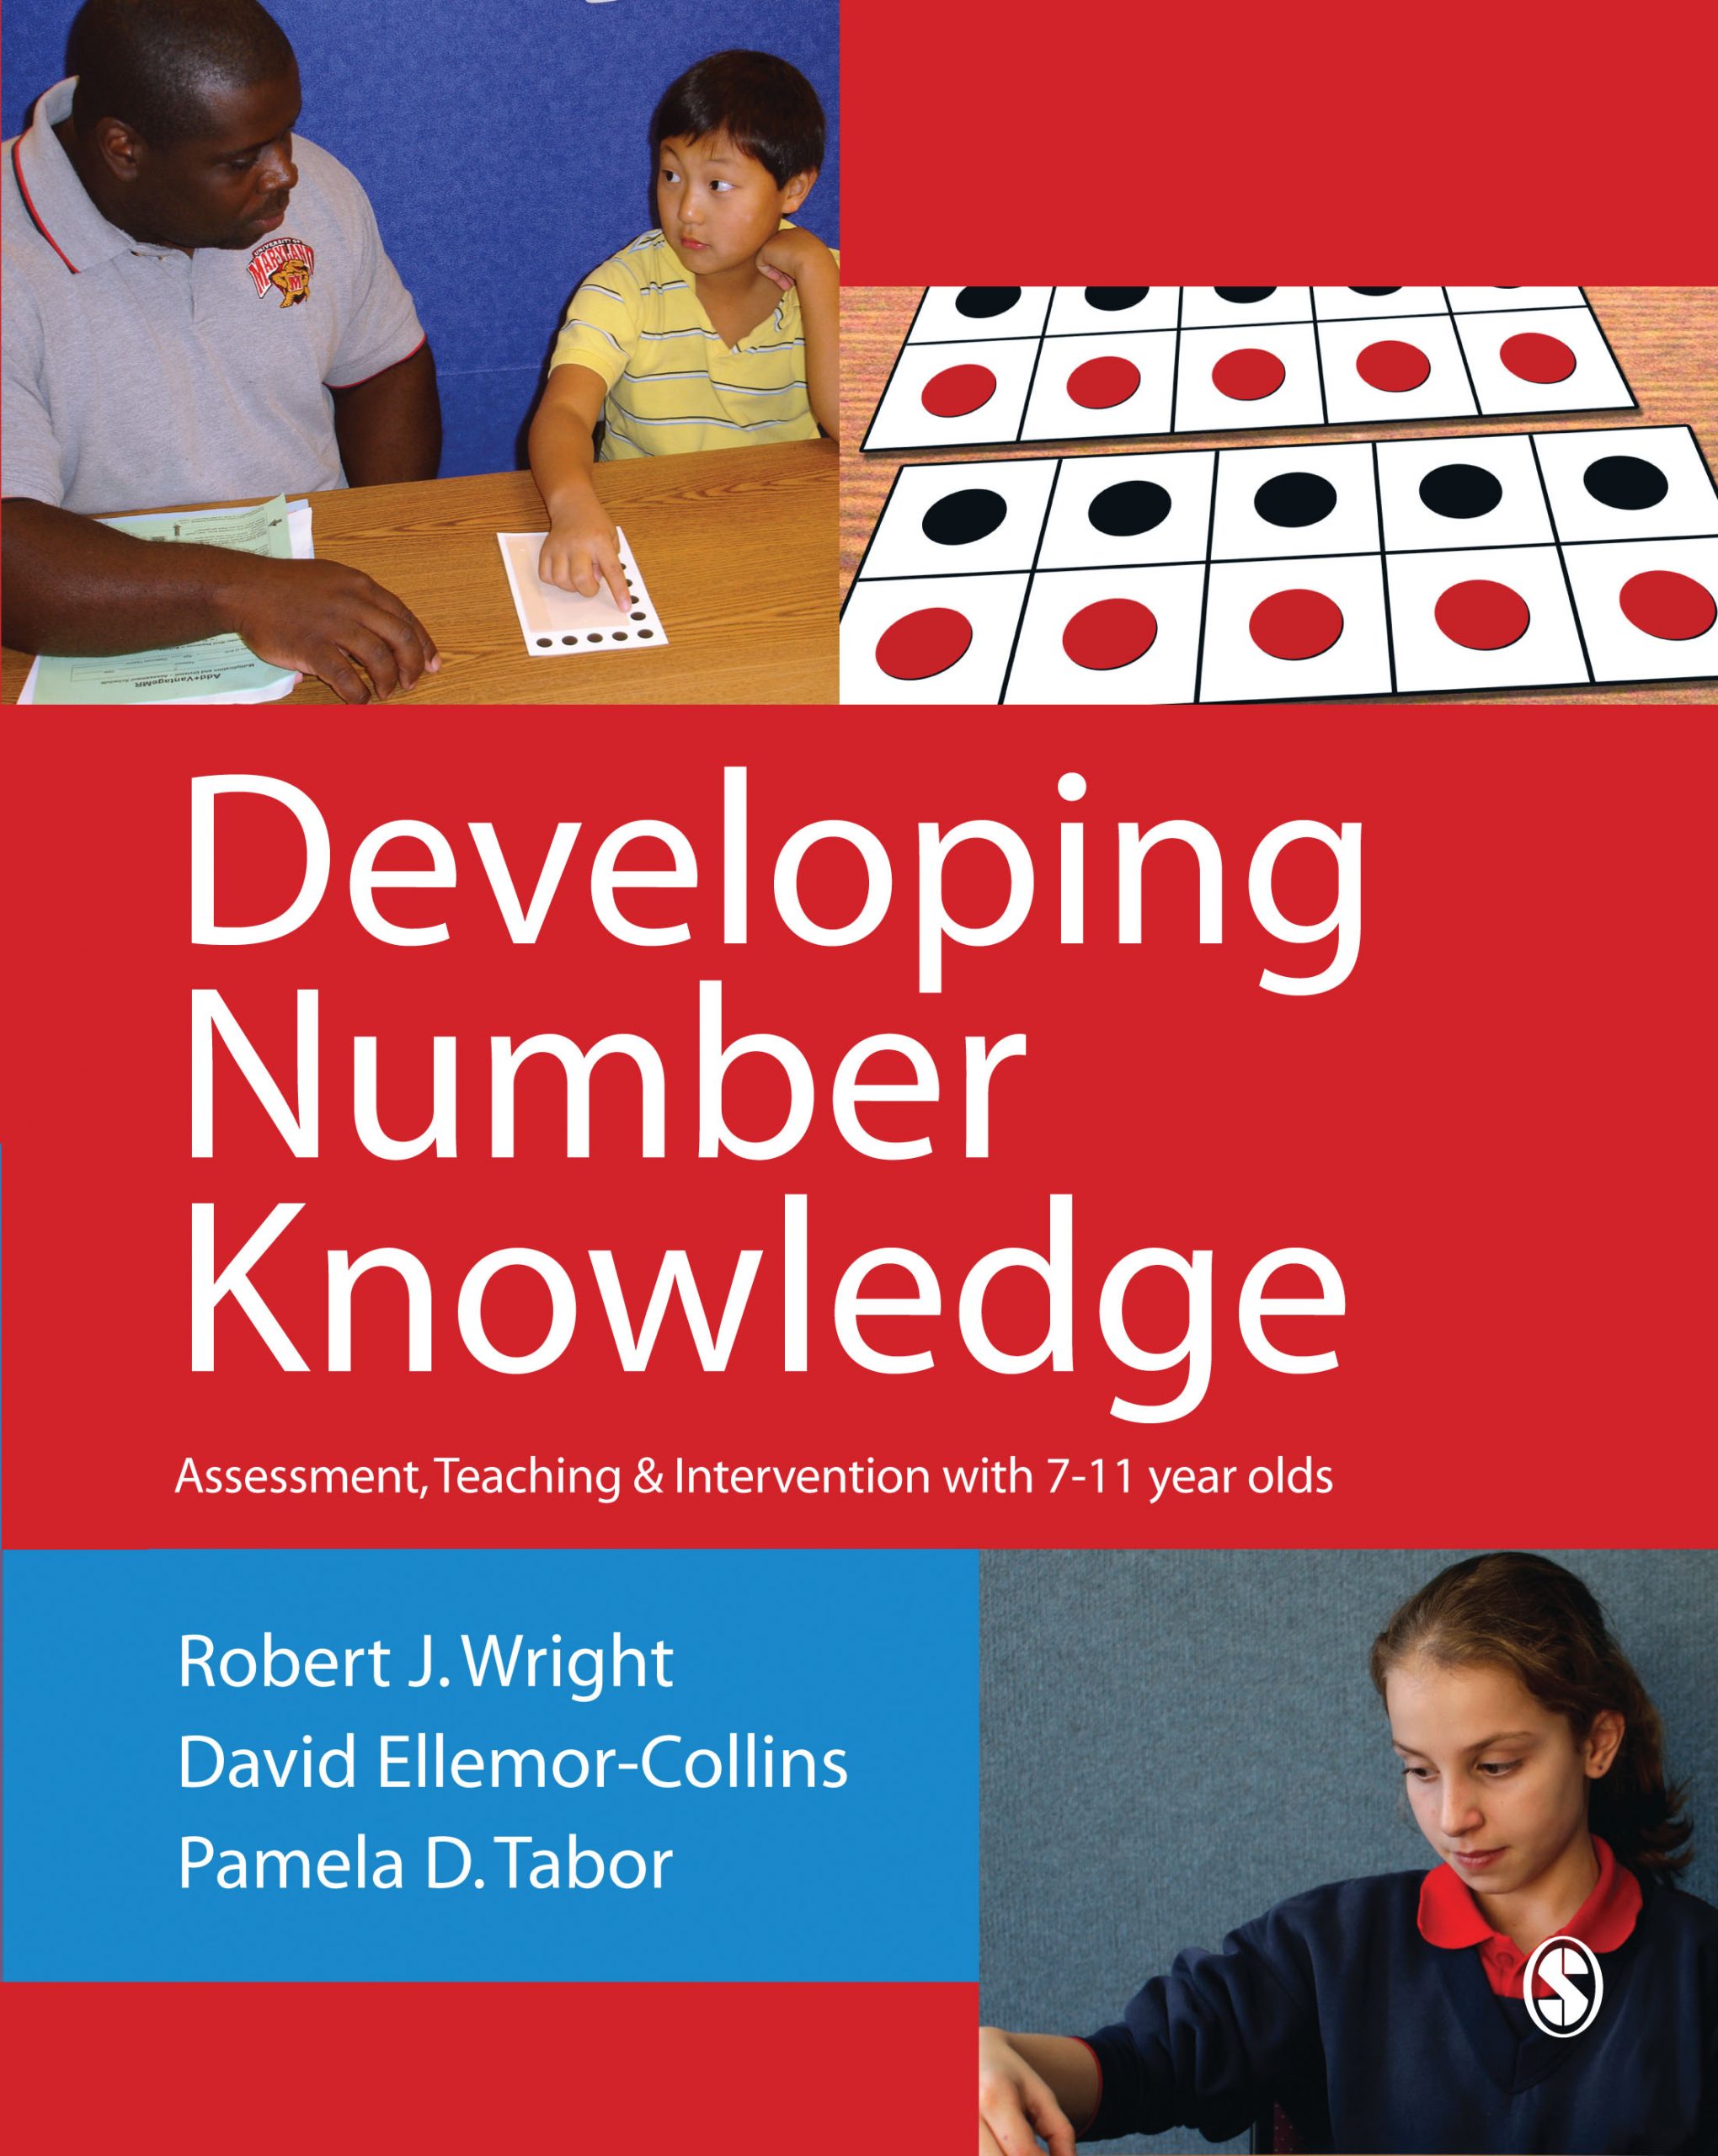   Developing Number Knowledge: Assessment, Teaching and Intervention with 7-11 year olds